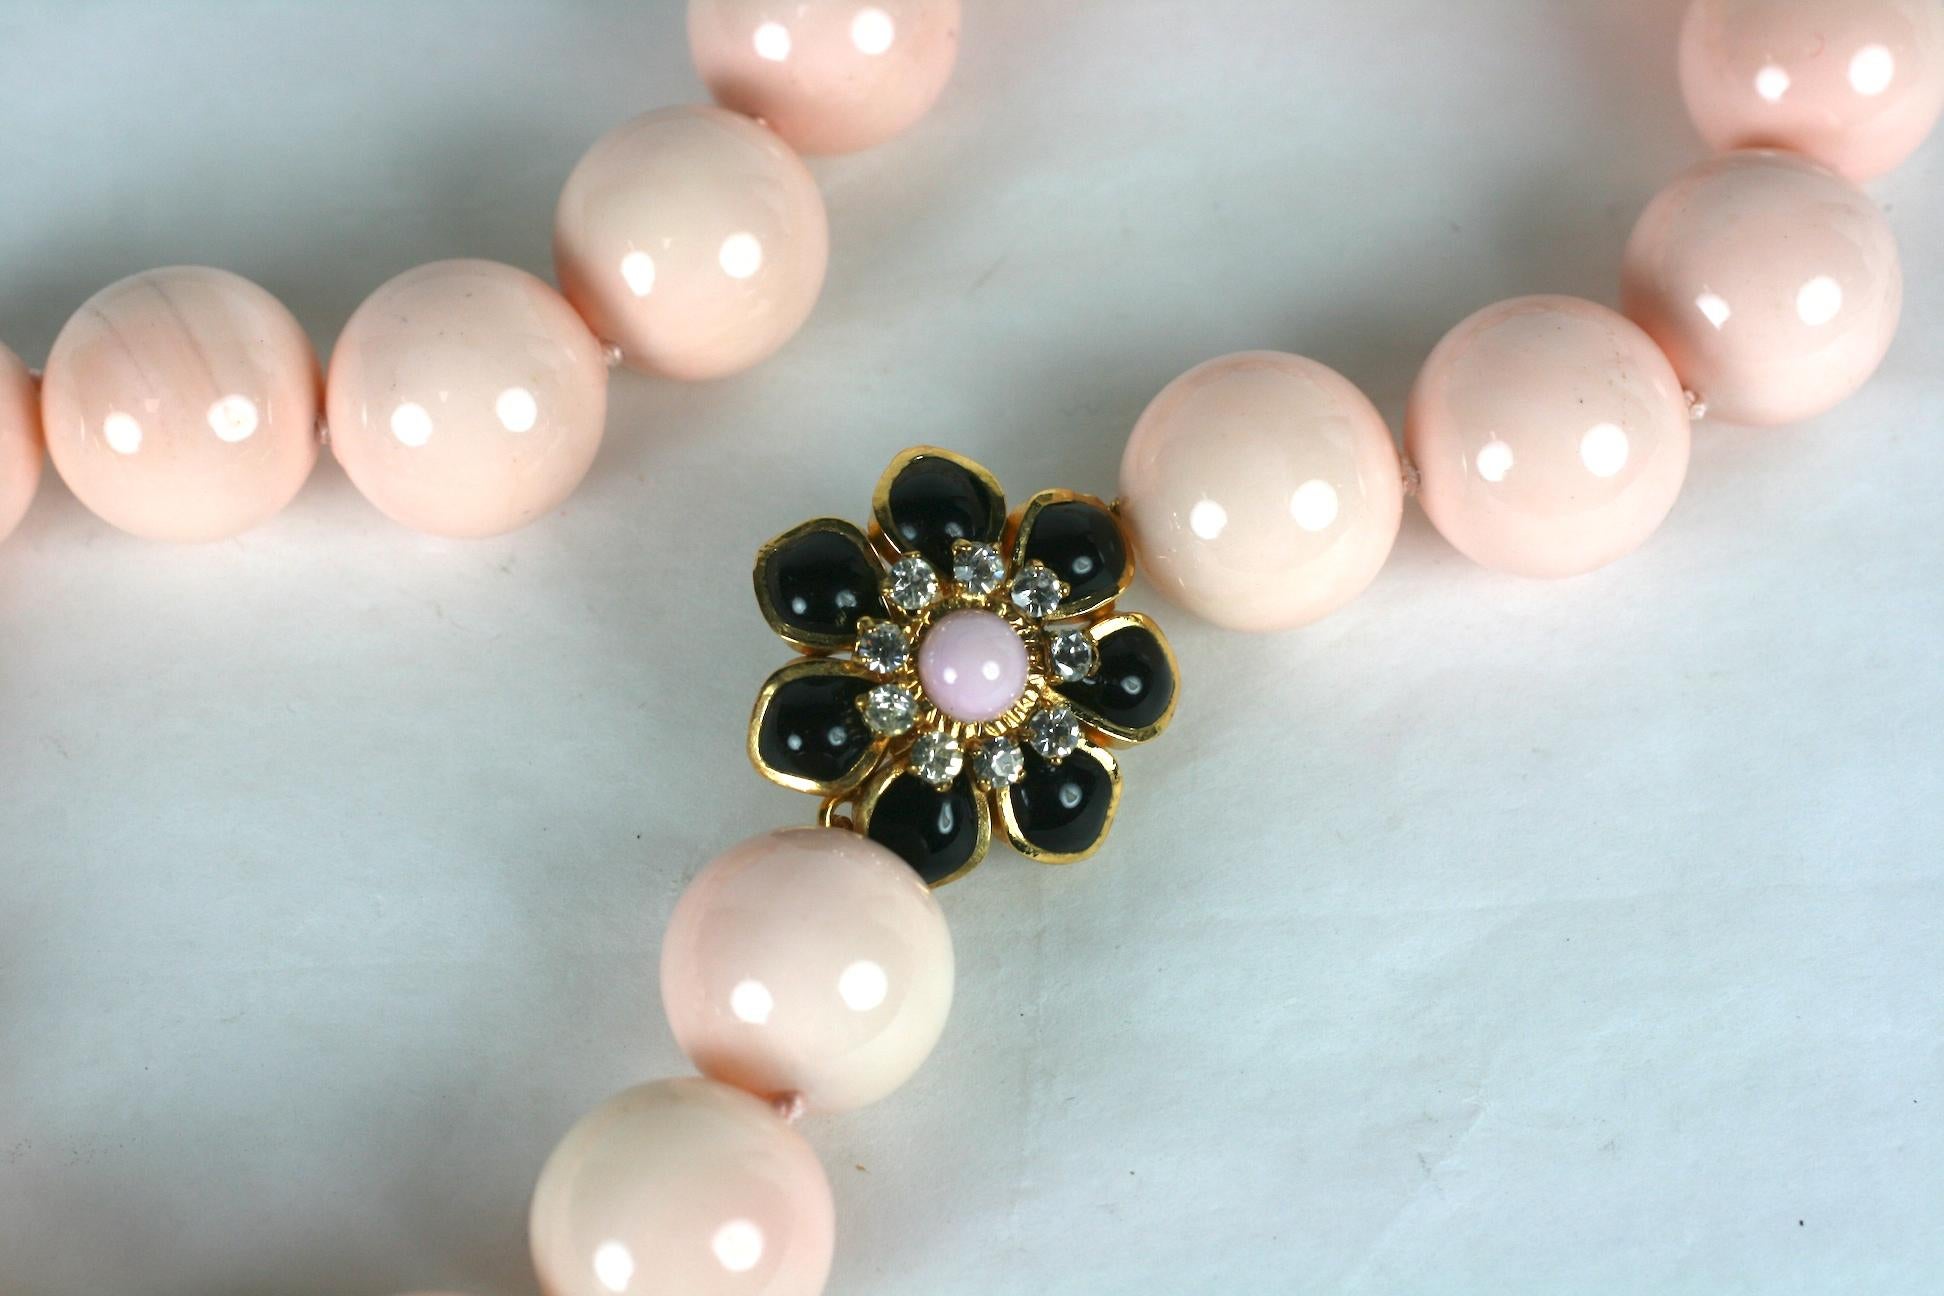 Pale coral laquered mother of pearl hand knotted beads with hand made Marguerite floral clasp in jet and pale coral poured glass enamel with crystal rhinestone accents. Hand made in our studios in France. 
